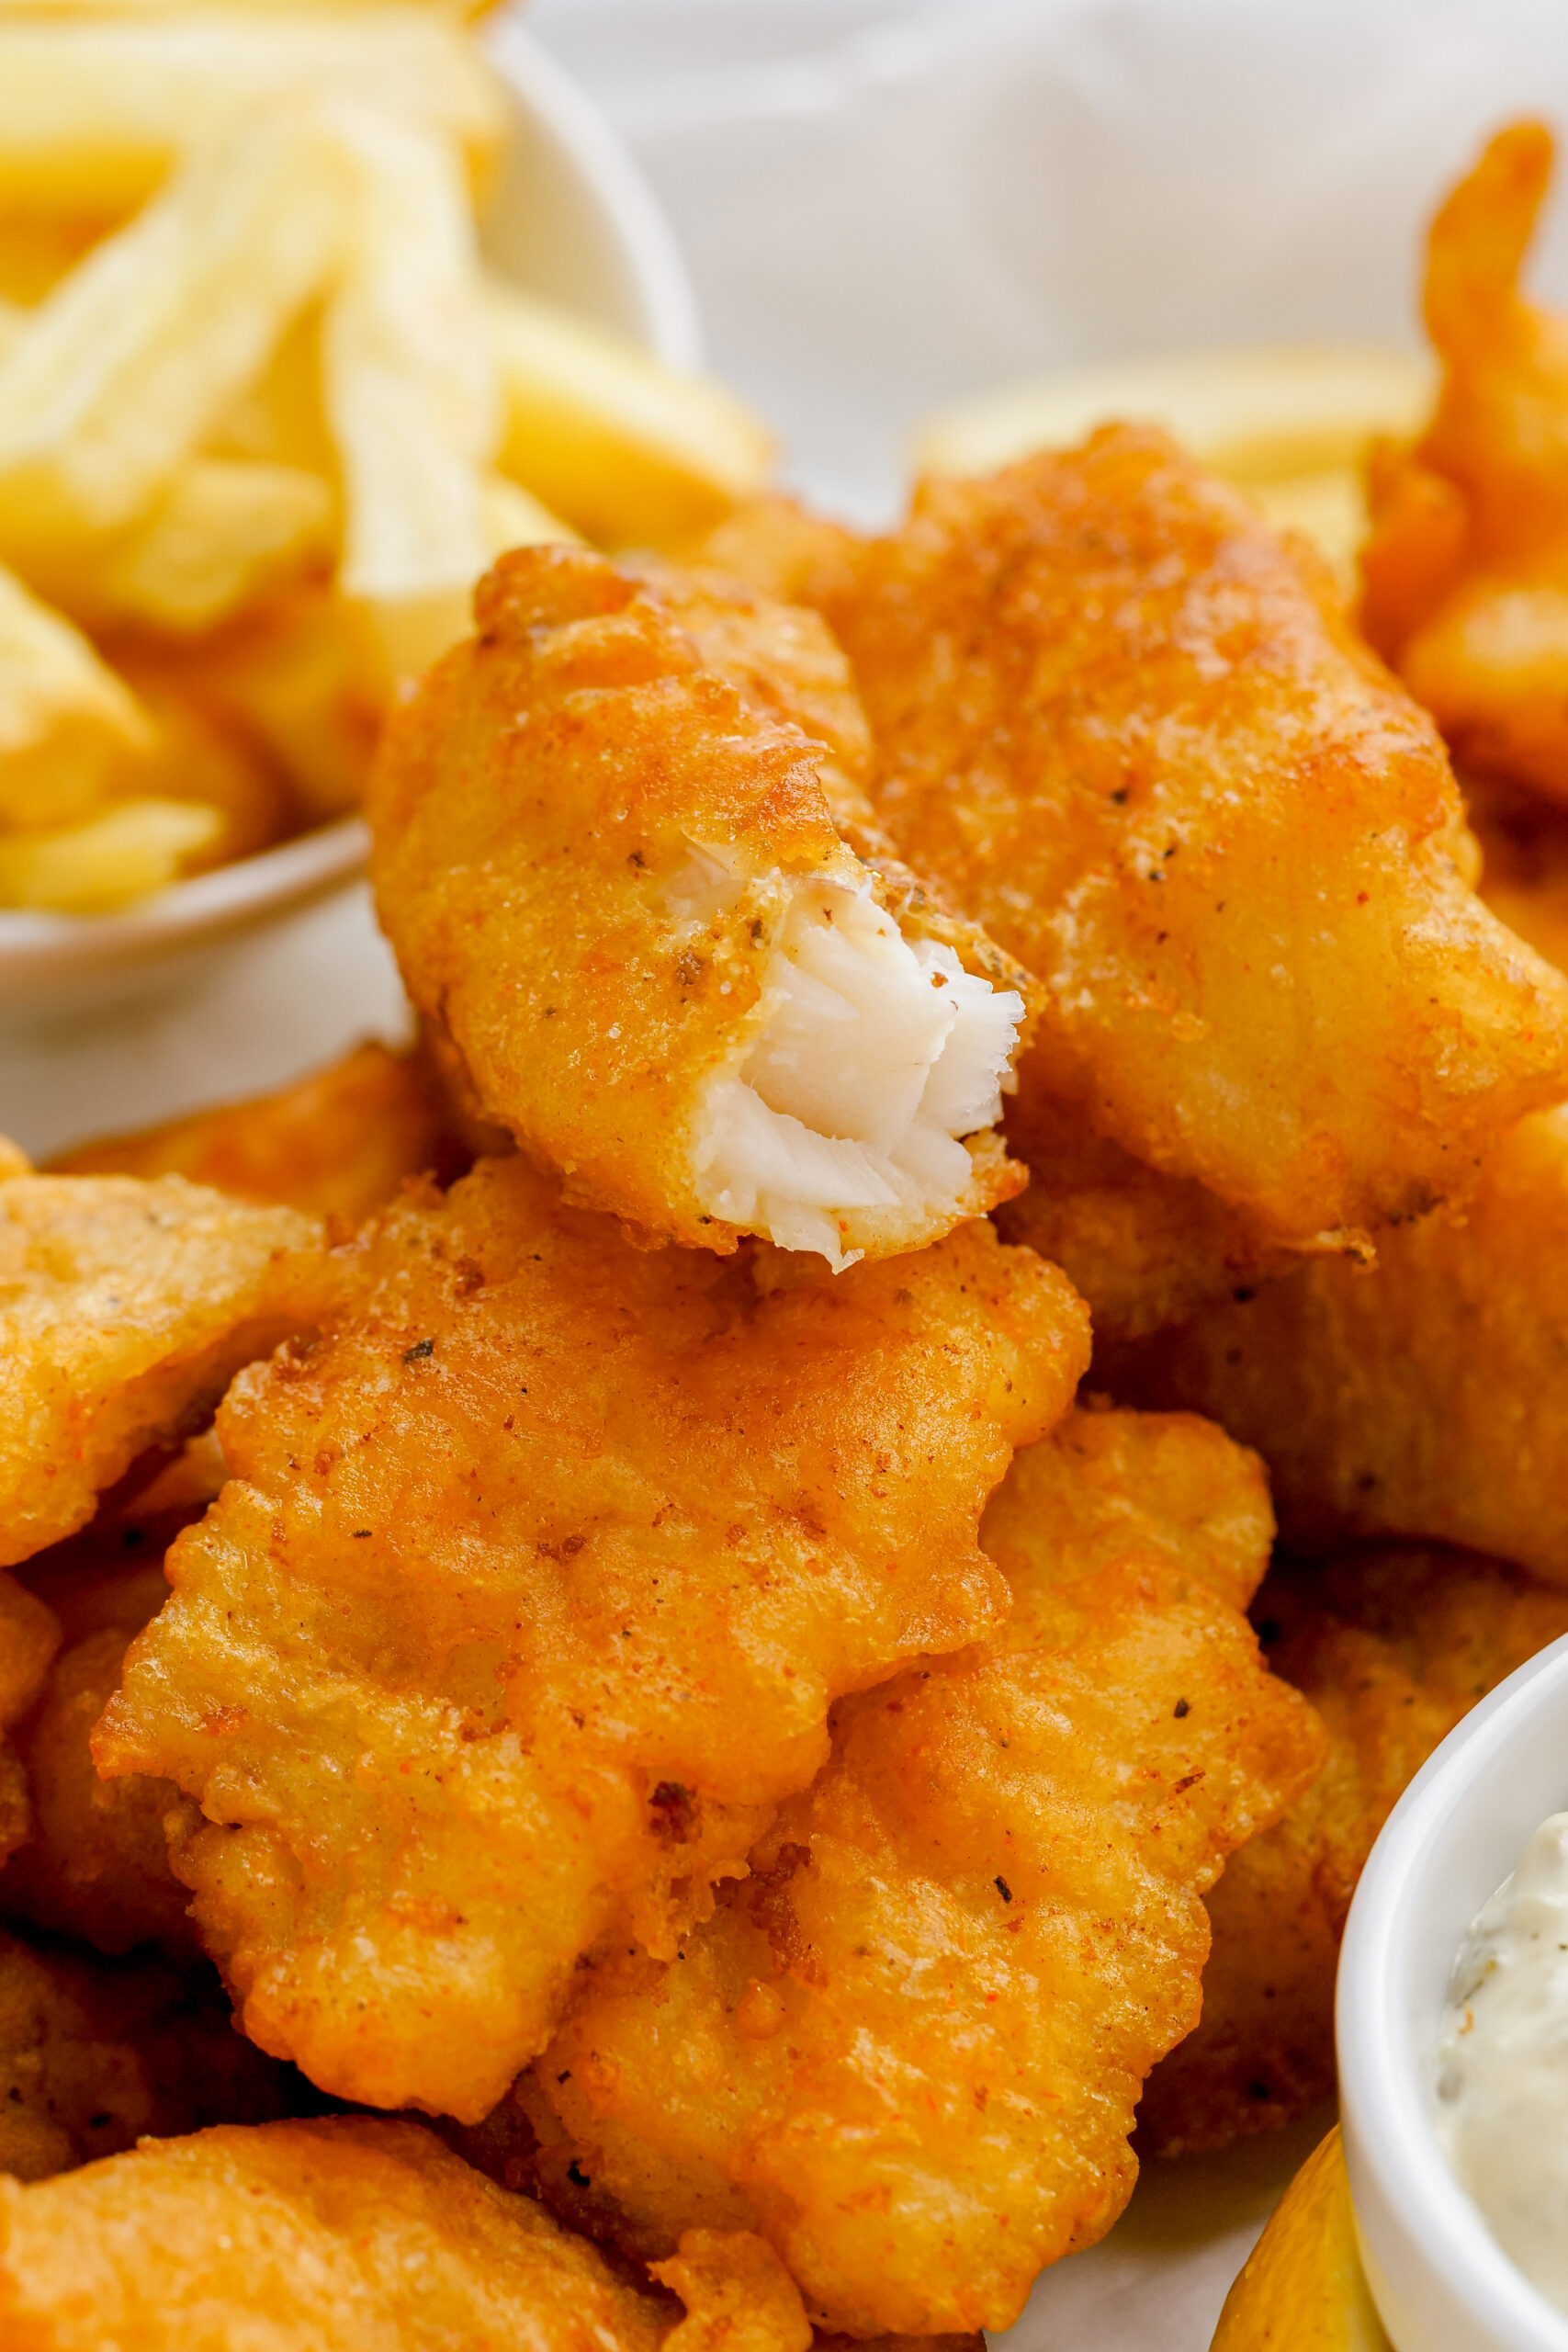 10 top tips for perfect fish and chips